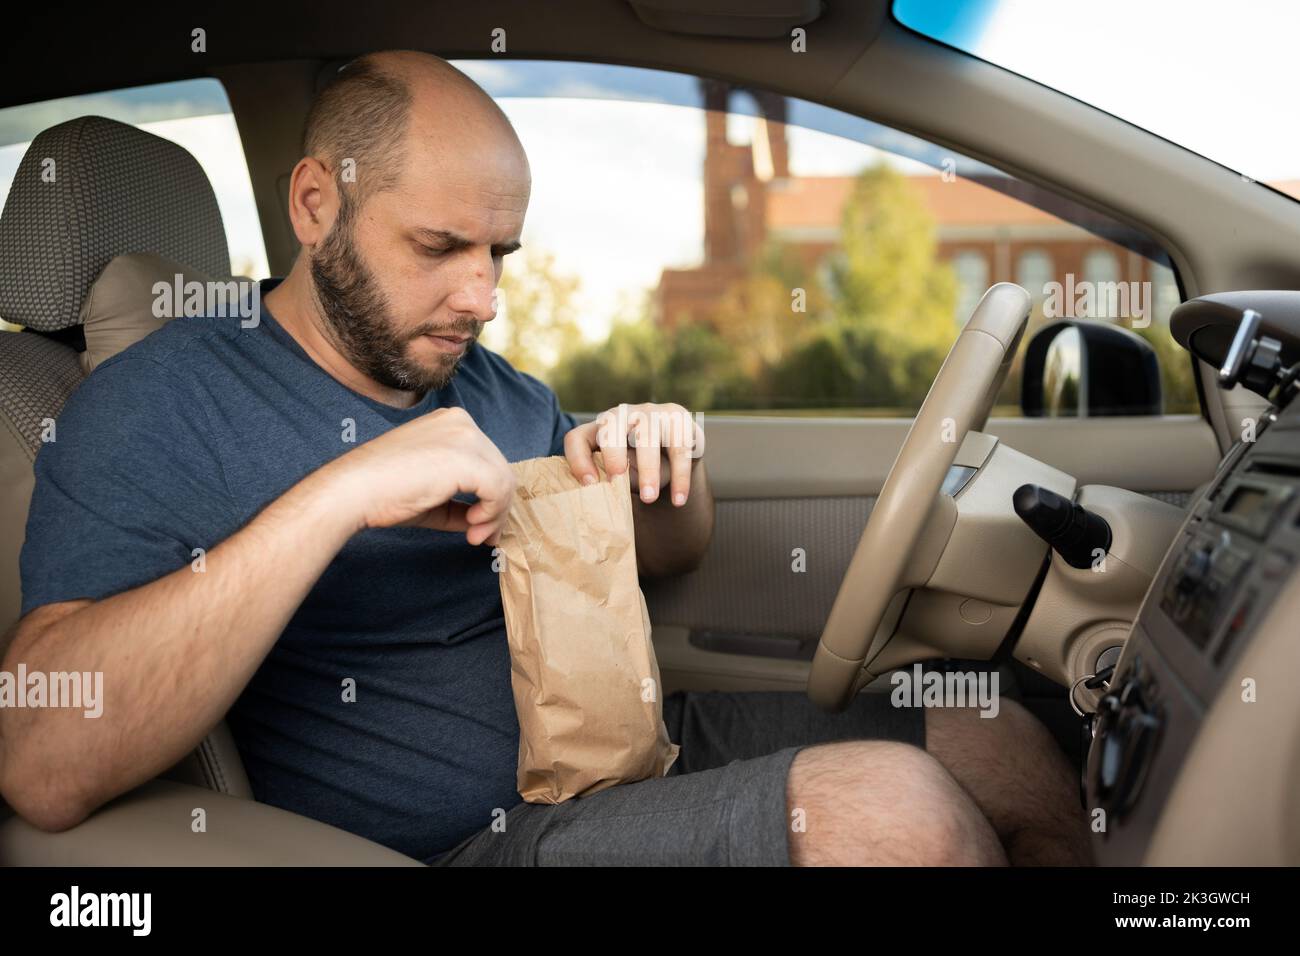 The driver of the car unpacks a package with a hamburger while standing in a traffic jam on the road. Fast food and takeaway concept Stock Photo